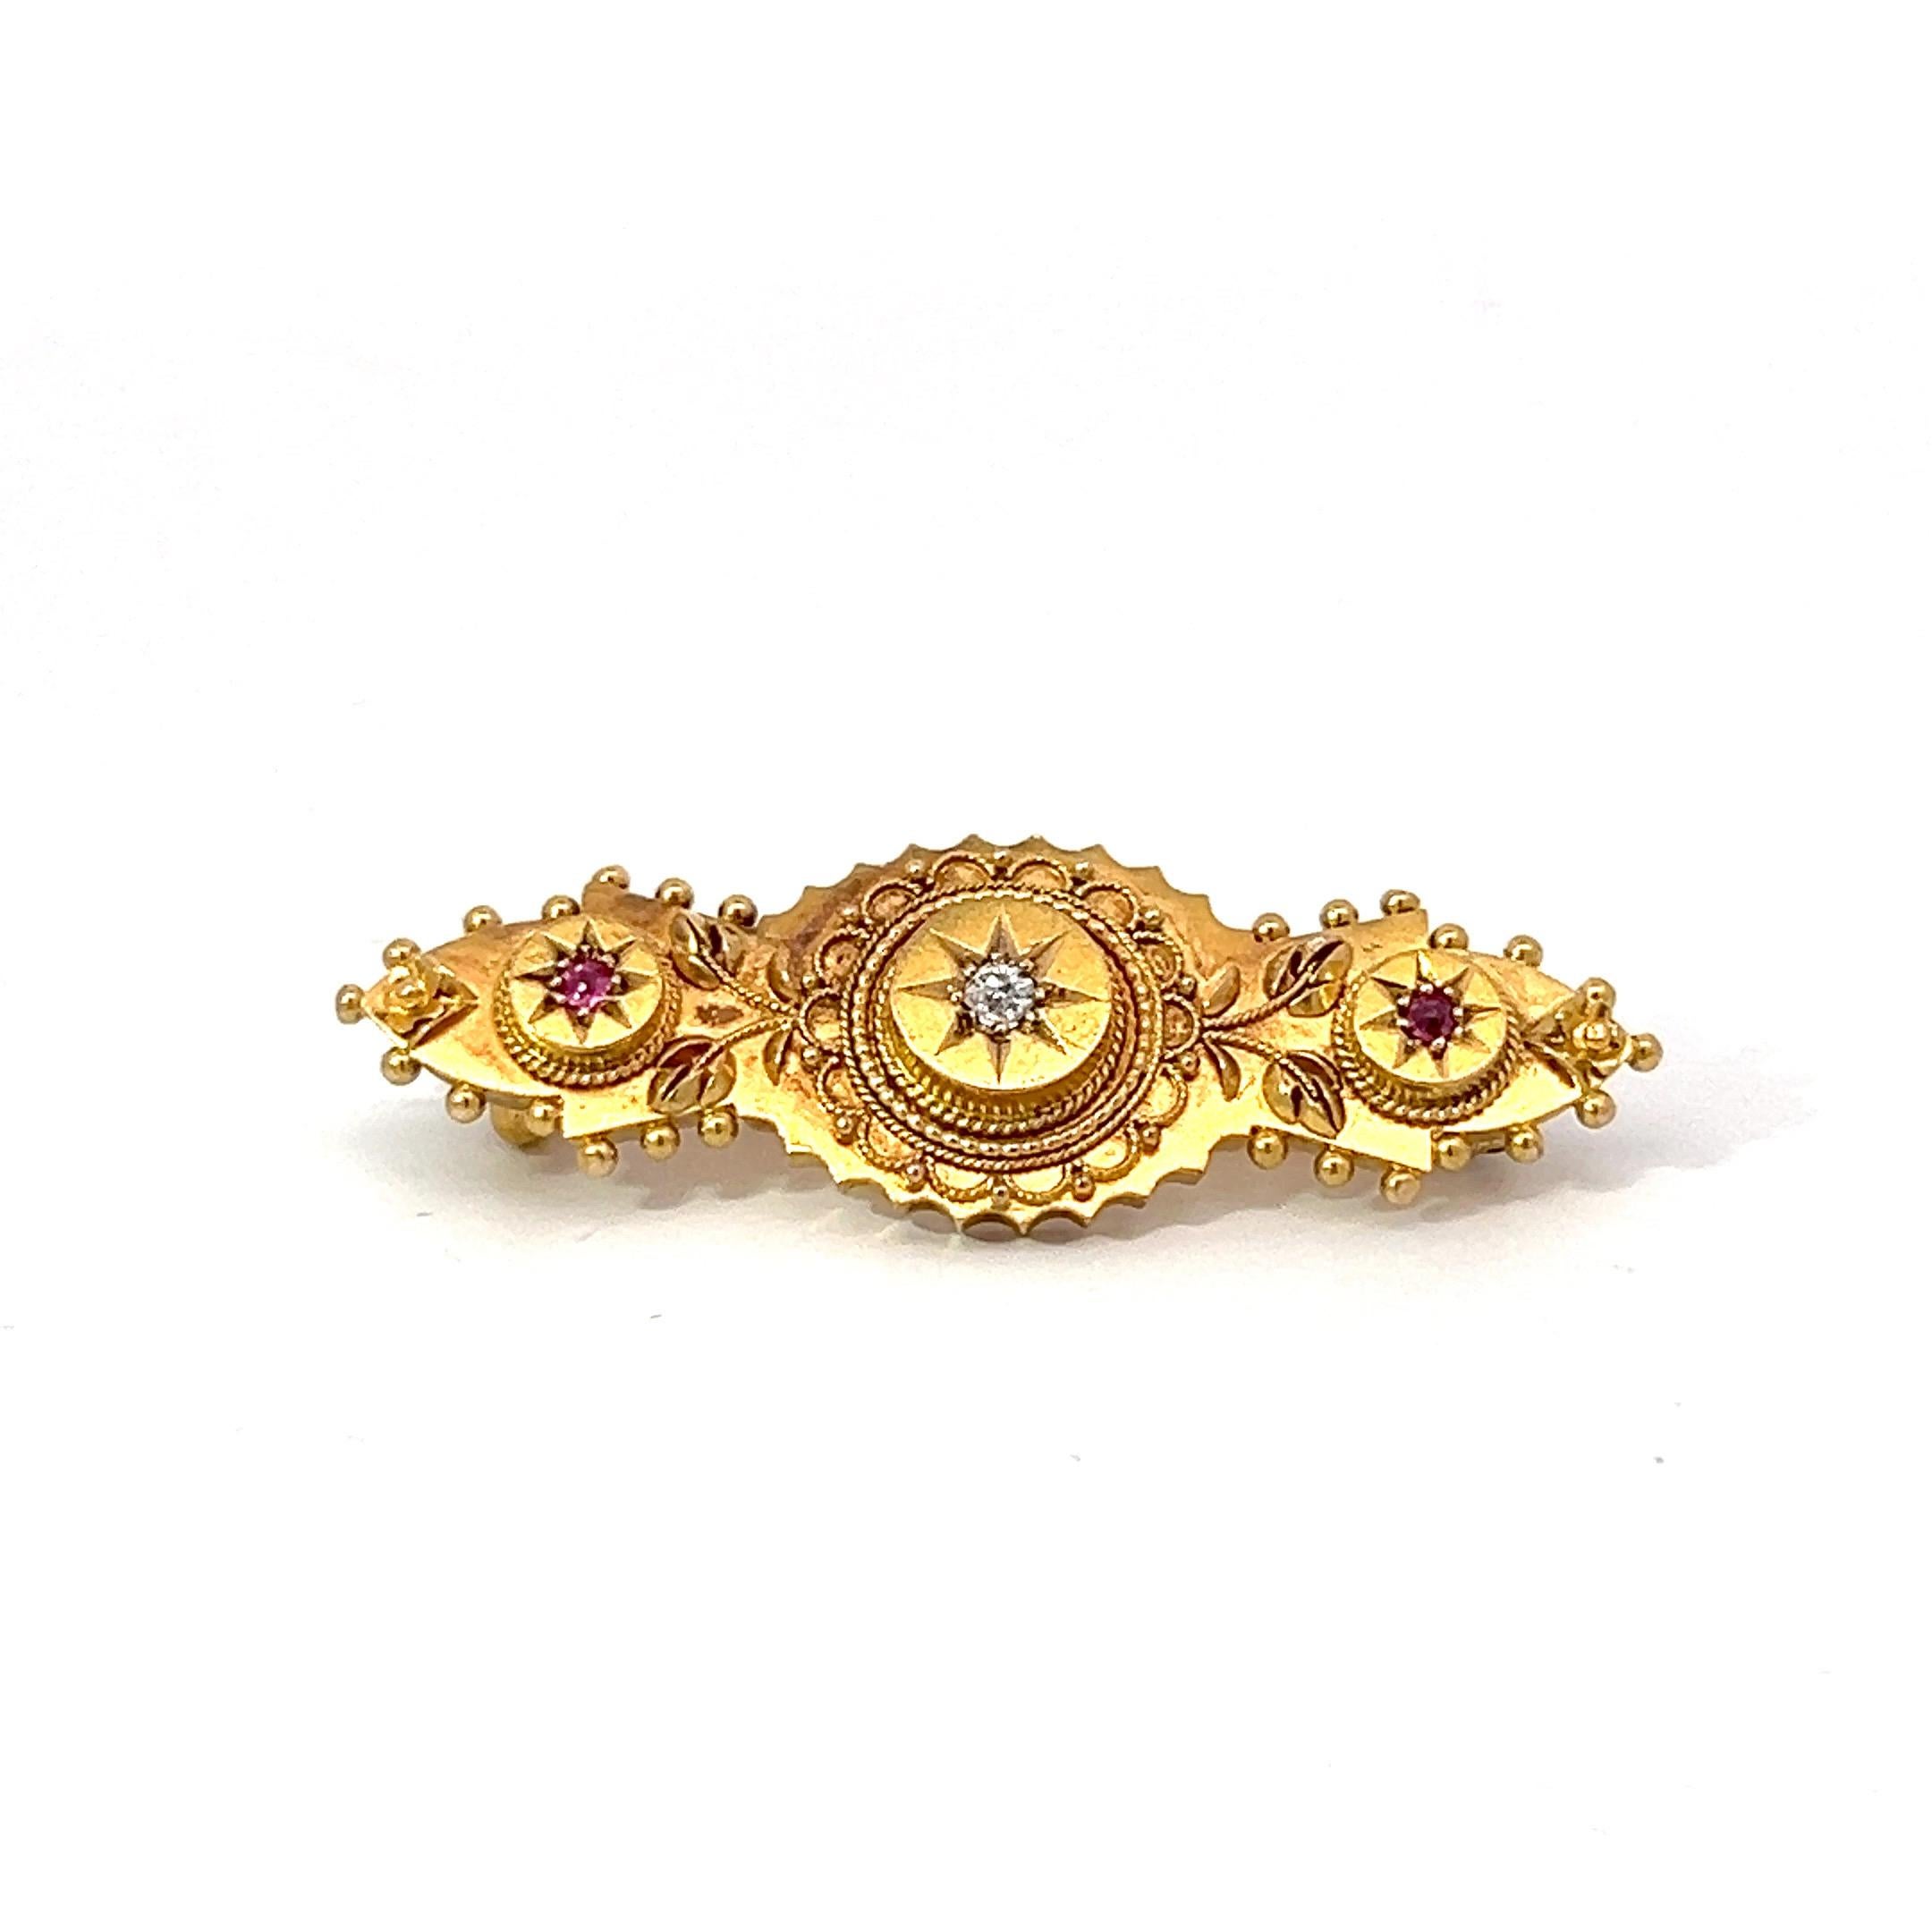 Unusual and fine antique Victorian brooch handcrafted in 15 karat yellow gold composed of 3 decorative floral section featuring an approximate 0.10 carat diamond old European round cut claw - prong set in a deep star shaped design, and with smaller